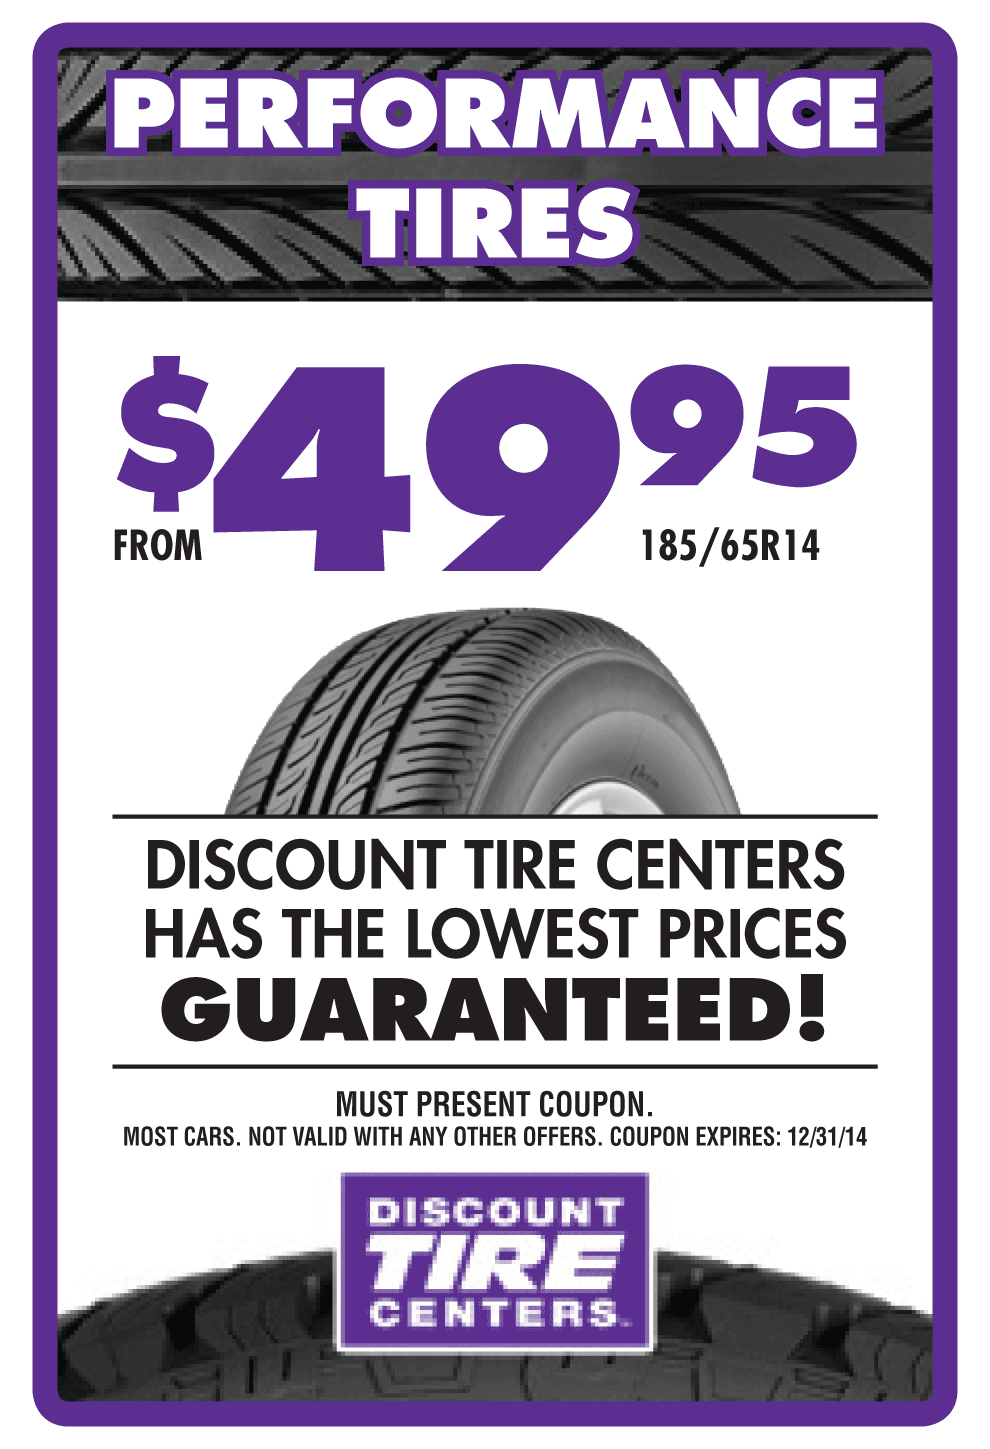 Performance tires from $49.95 (185/65R14) Discount Tire Centers has the Lowest Prices Guaranteed! Coupon expires 12/31/14.<br>
<a 
	class="btn-purple"
        style="font-weight:bold;"
	href="https://www.discounttirecenters.com/appointment.php" 
	target="_blank" 
	title="Make Appointment"
>MAKE AN APPOINTMENT
</a>